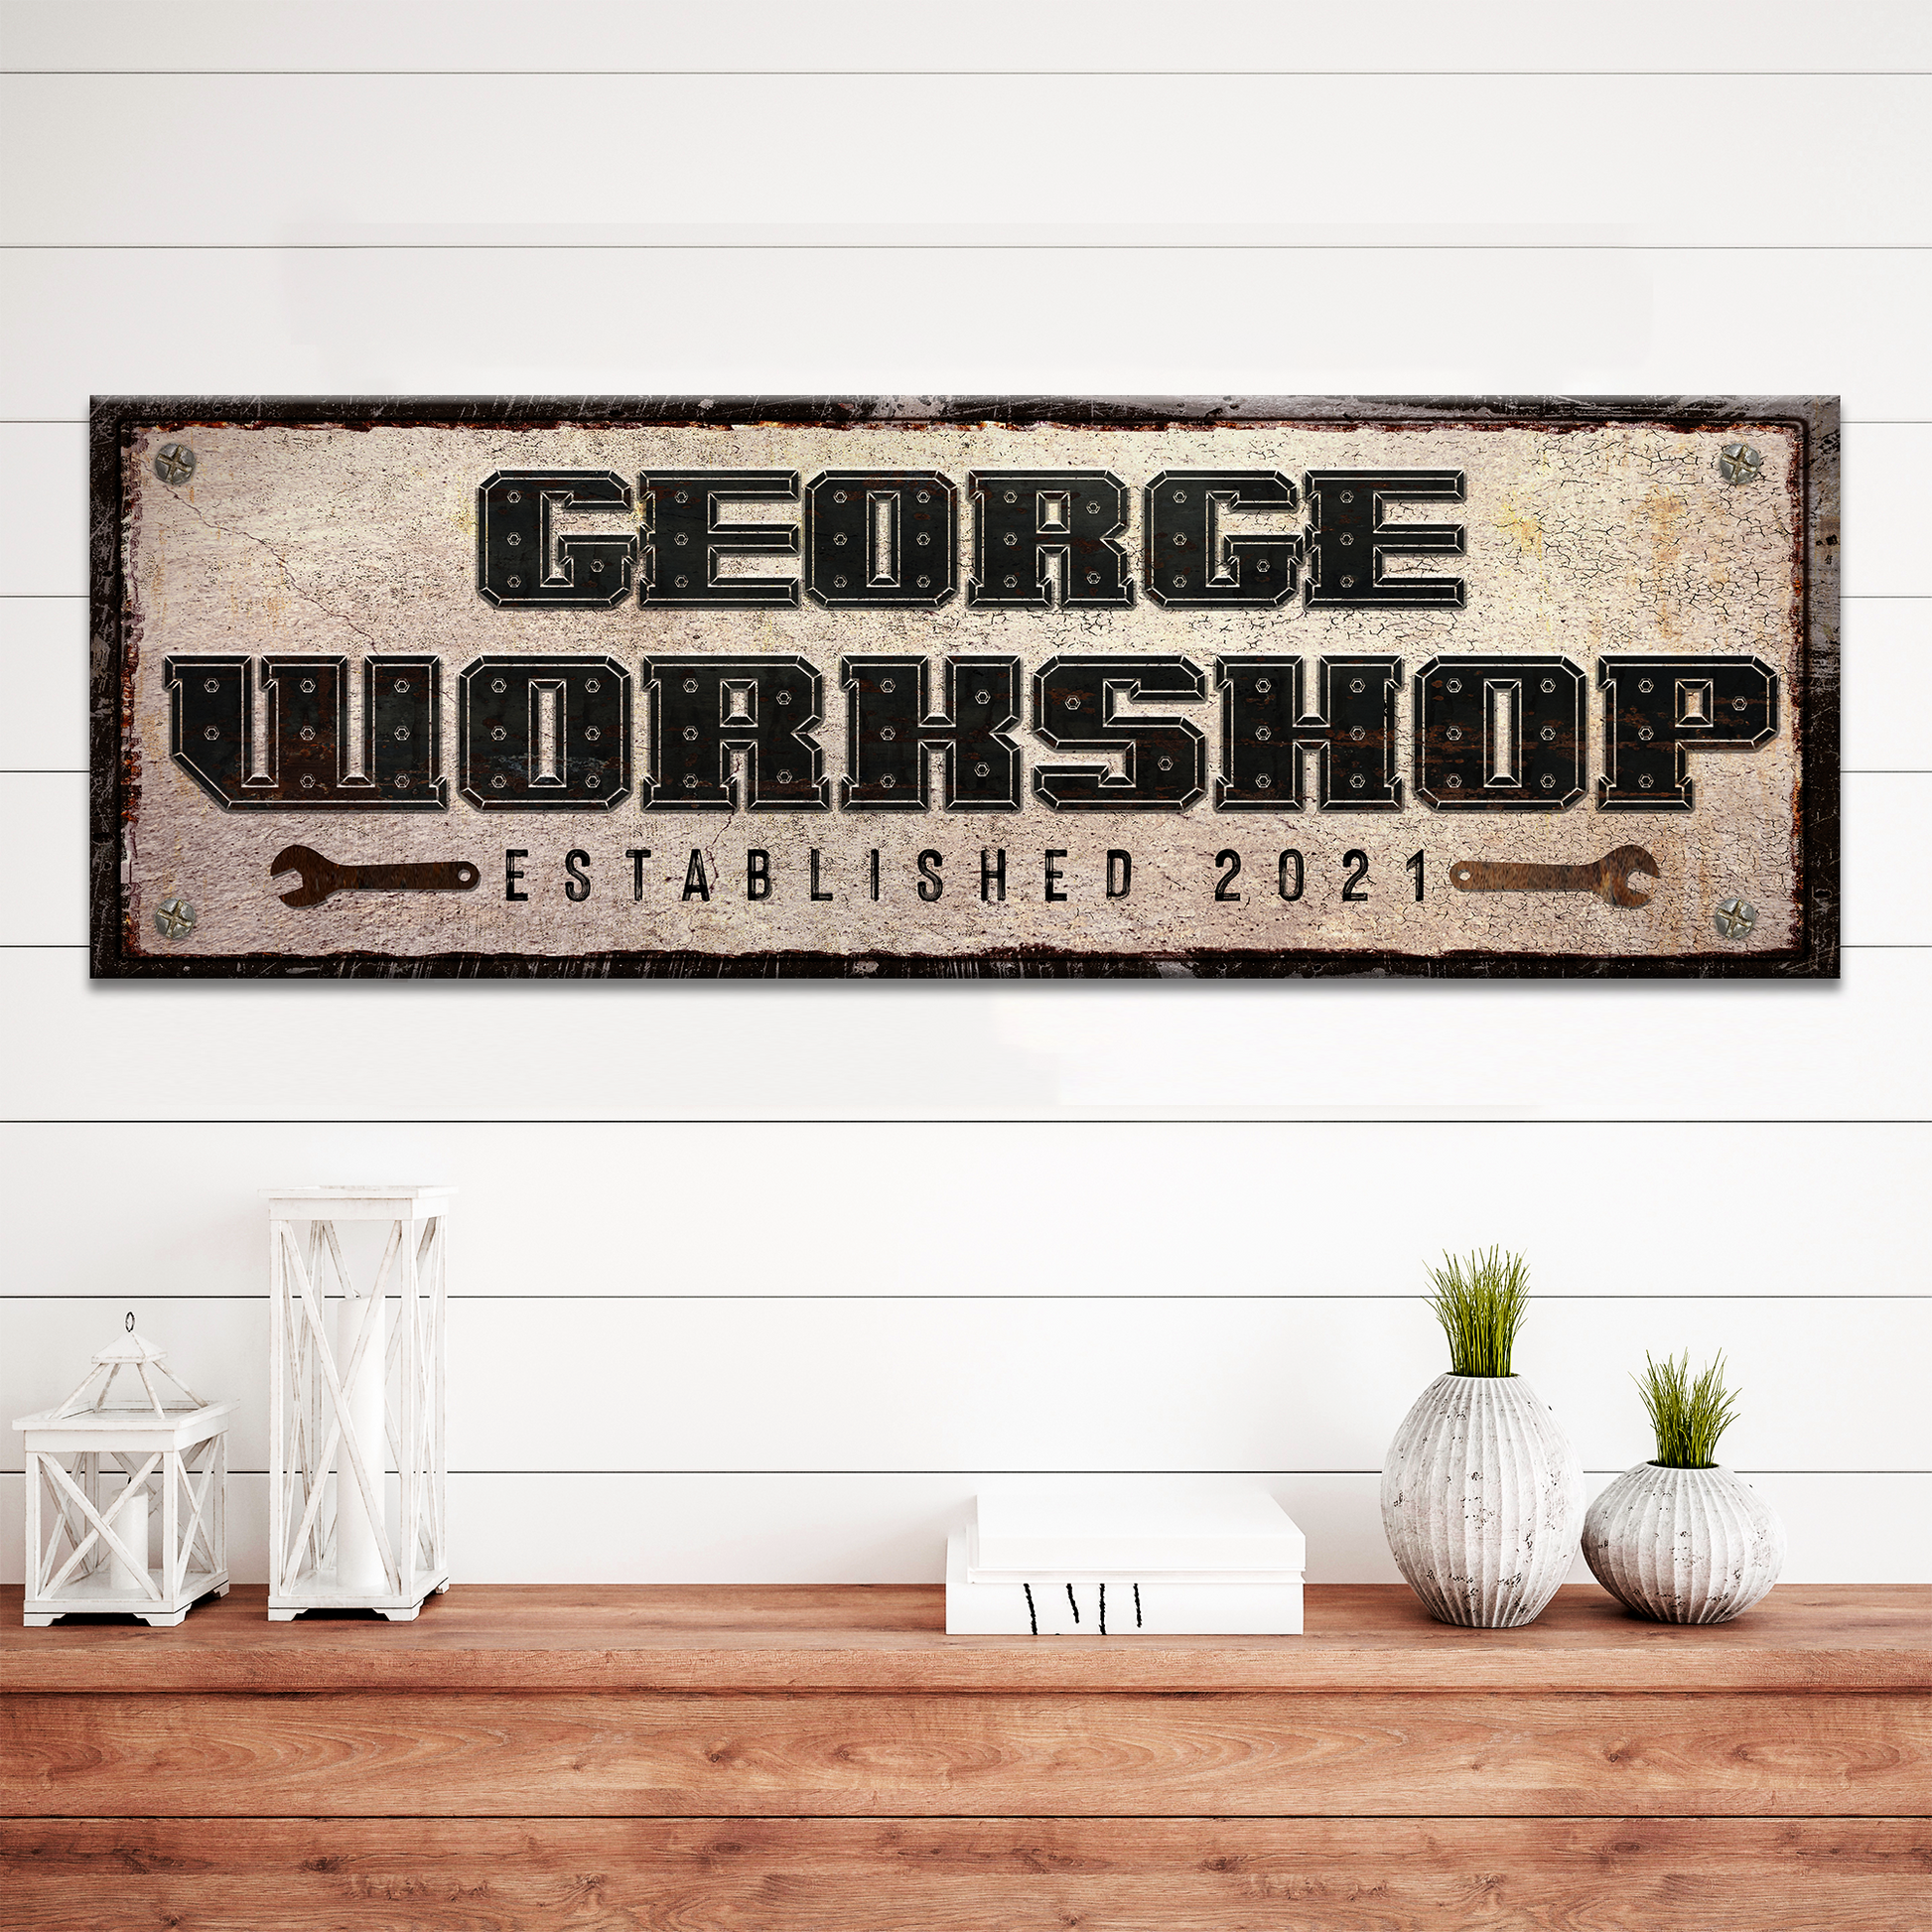 Family Workshop Sign - Image by Tailored Canvases